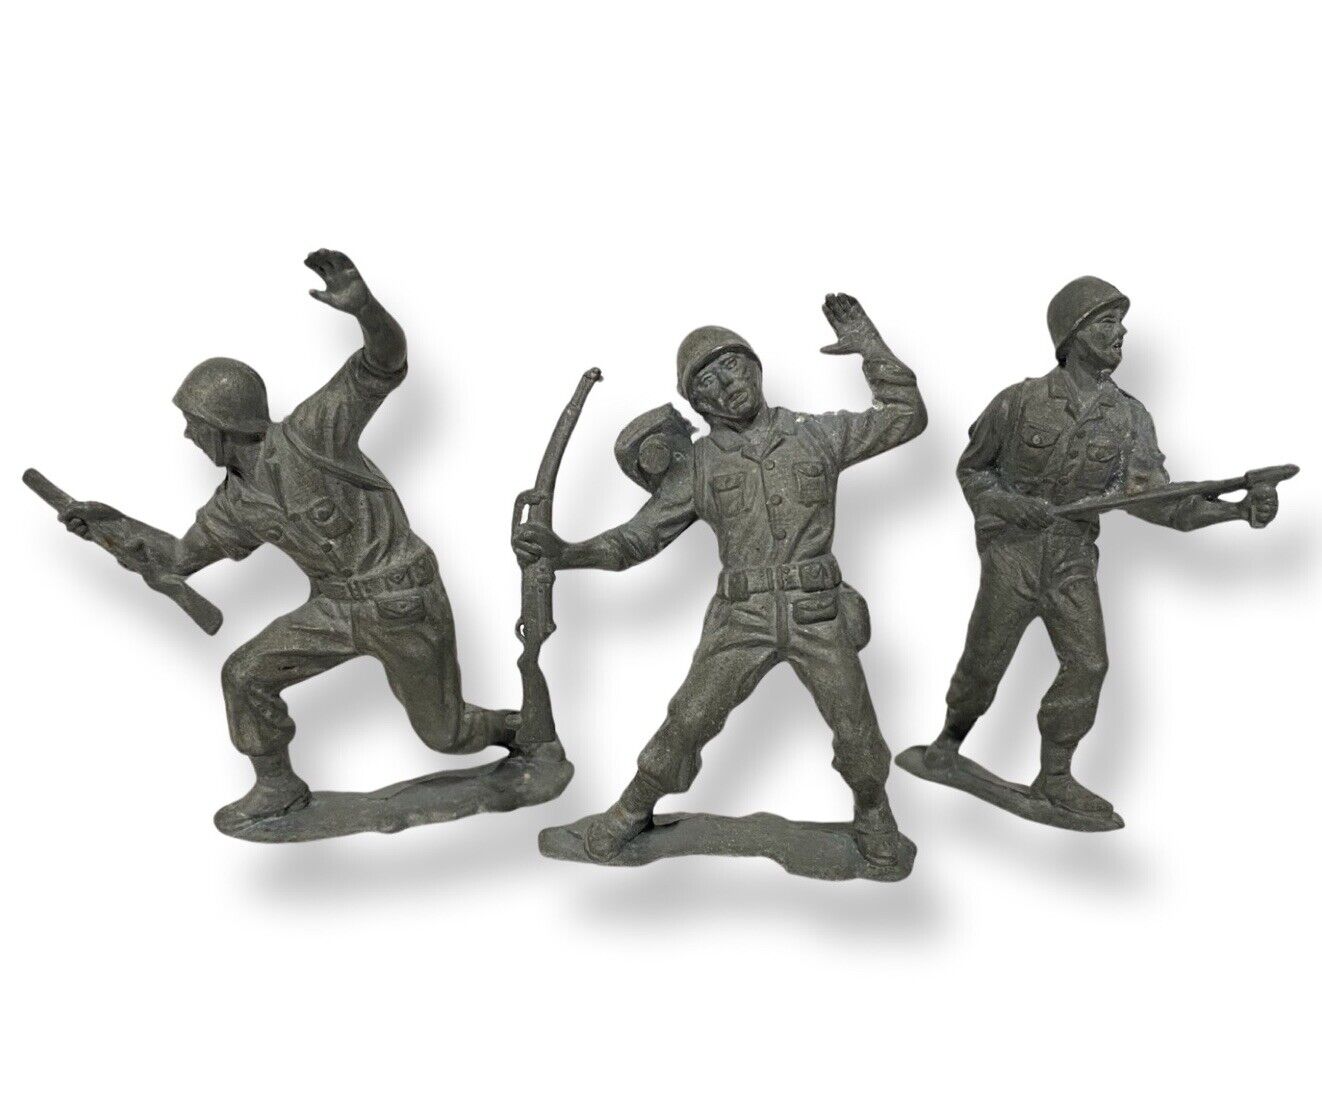 Rare Vintage Marx Prototype Metal Soldier Figurines, Possible Limited Production